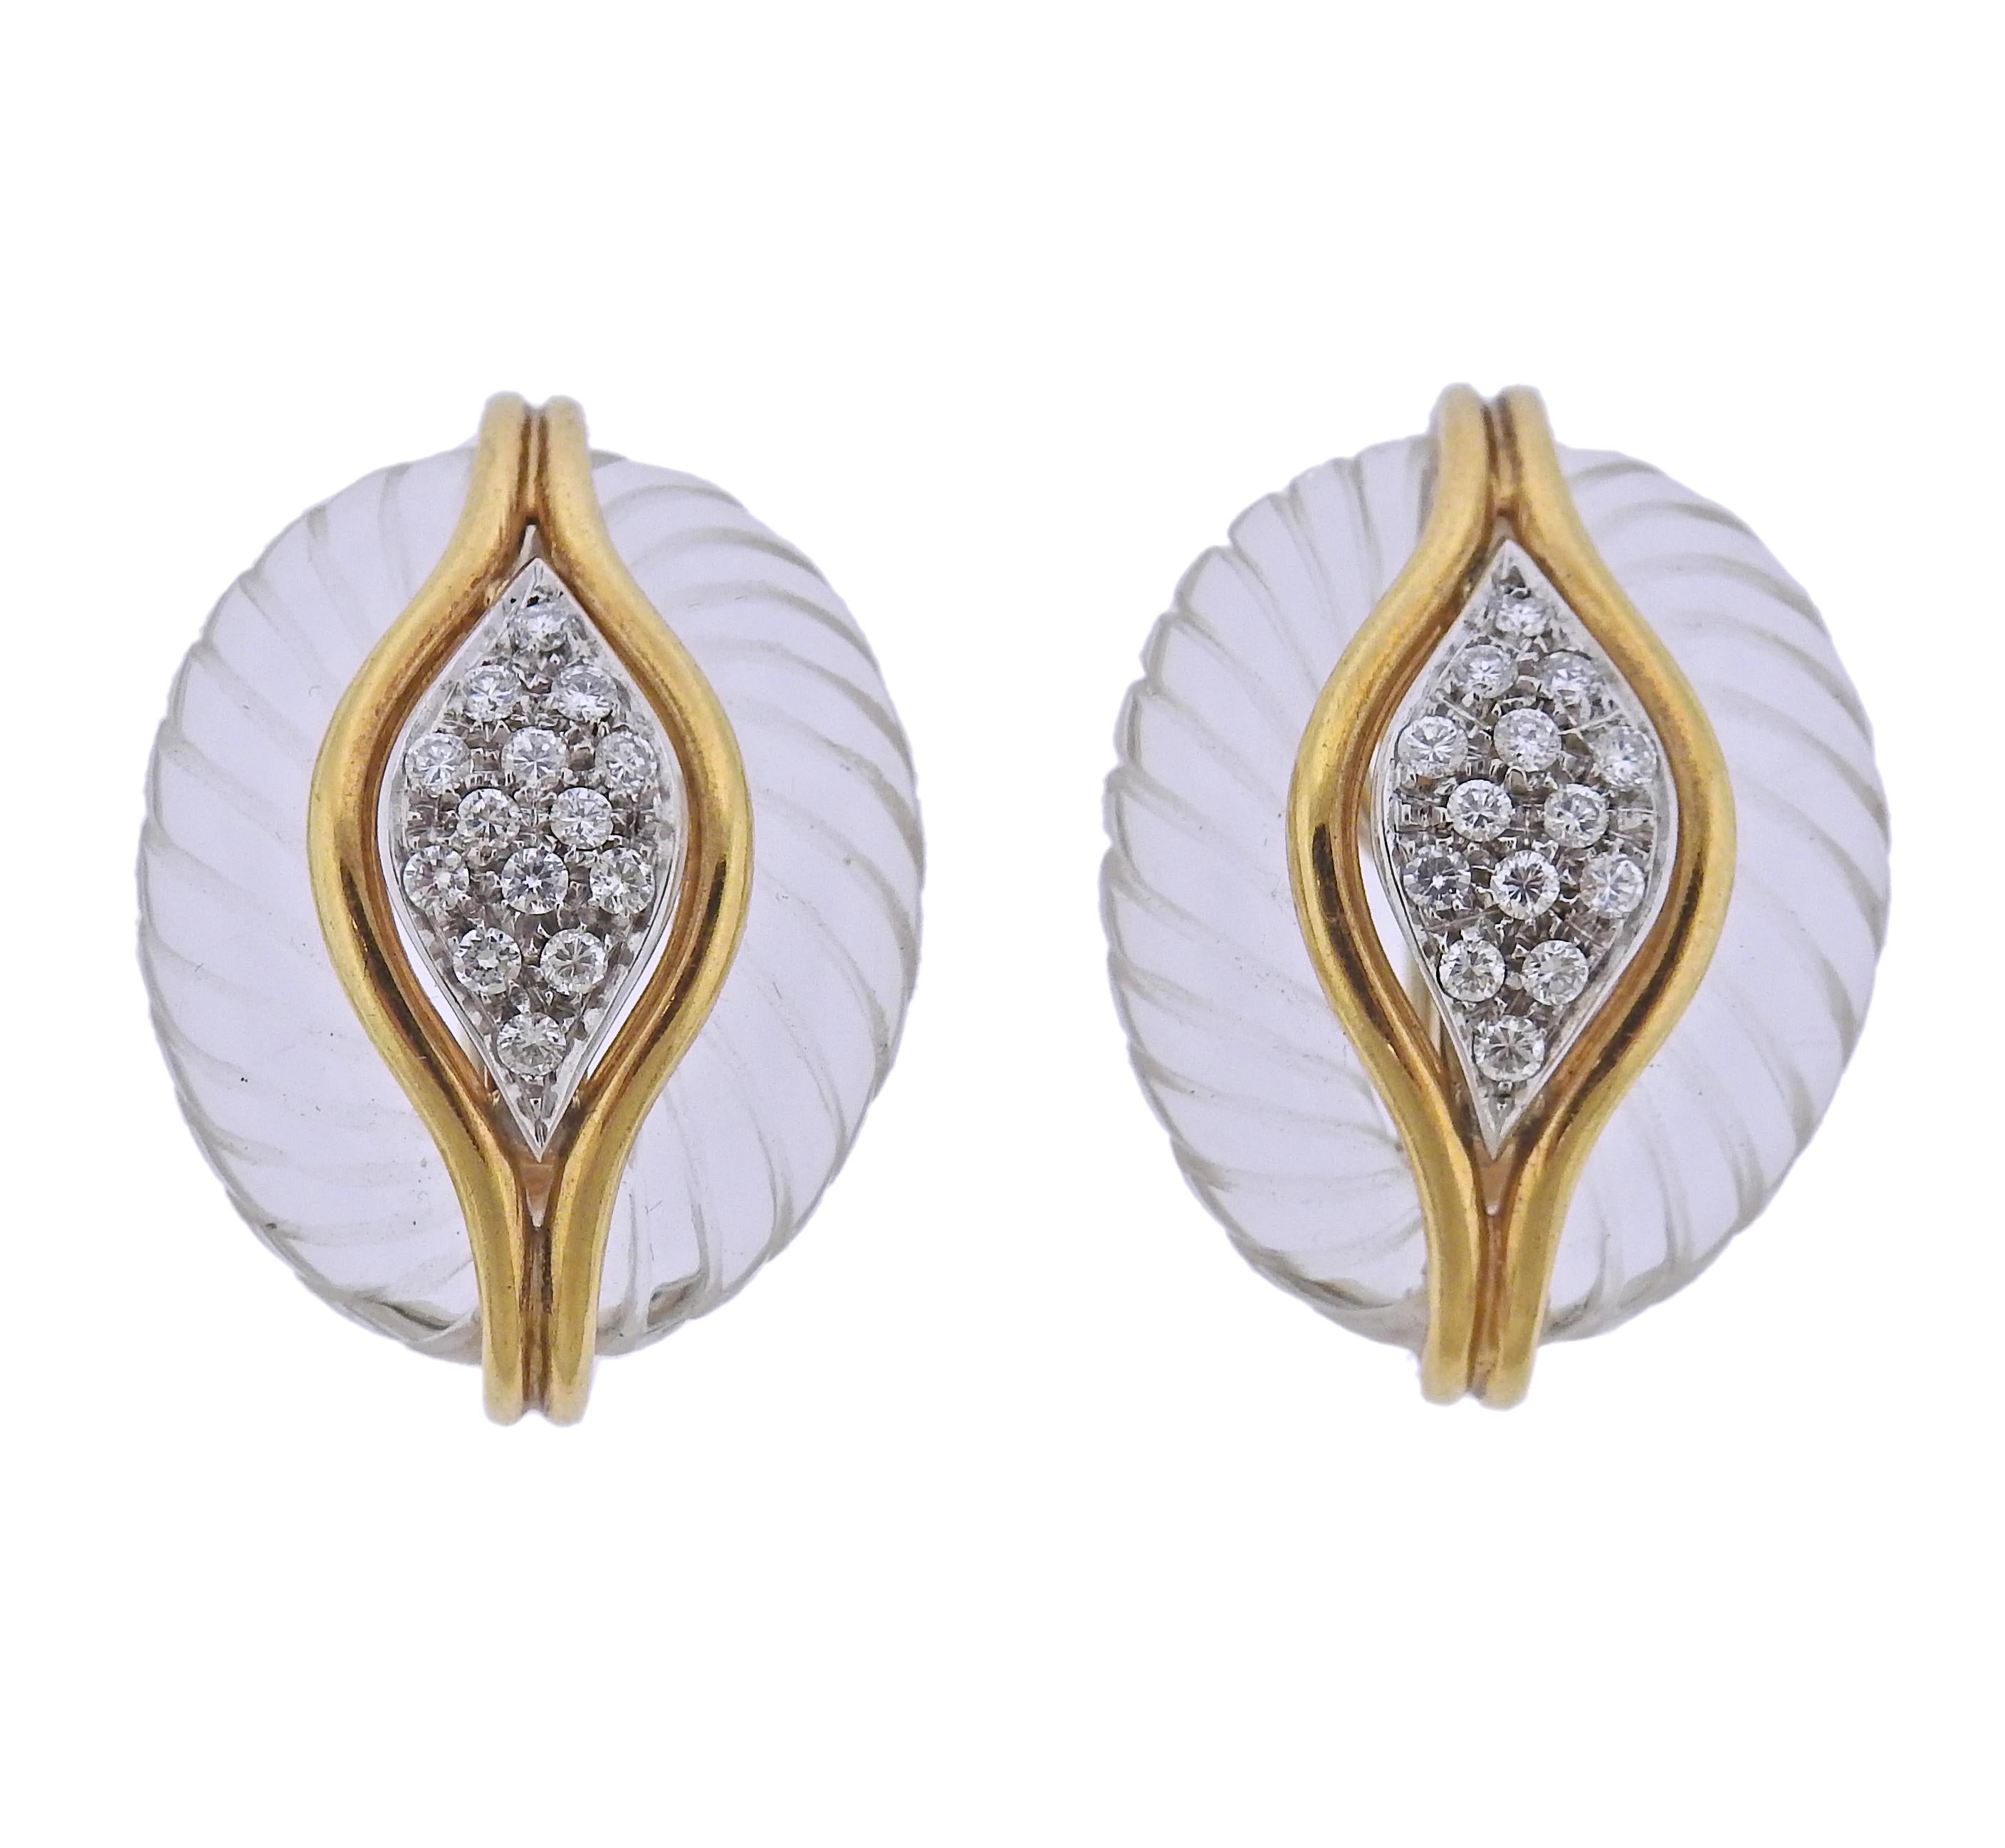 Pair of 18k gold earrings with carved crystal and approx. 0.30ctw VS/SI H diamonds. Earrings are 32mm x 23mm.  Marked 750. Weight - 25.9 grams.